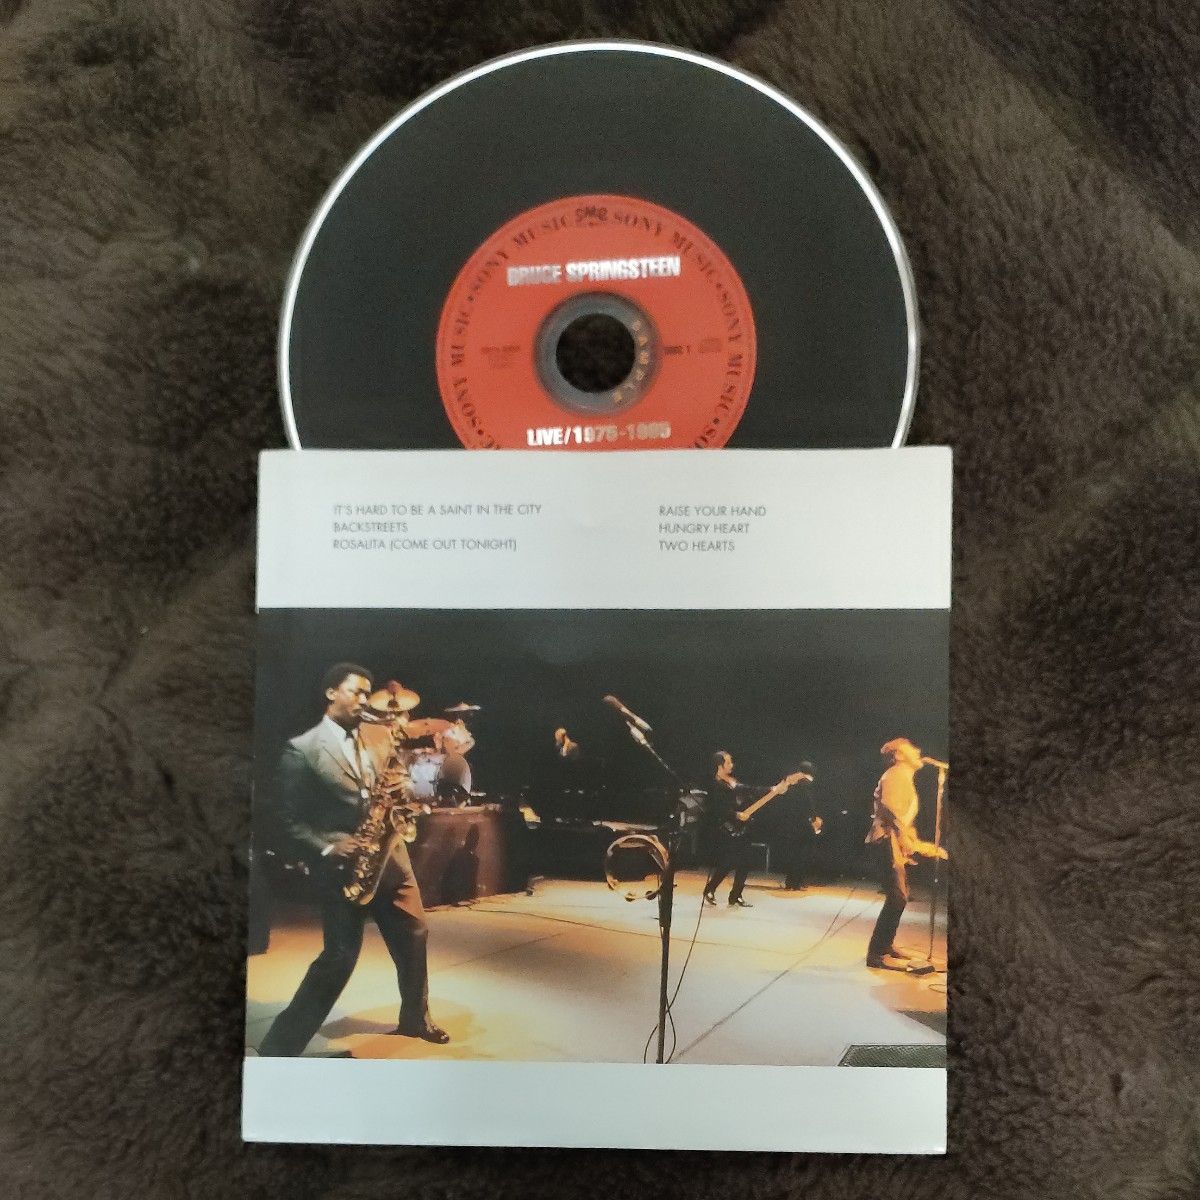 BRUCE SPRINGSTEEN and THE E STREET BAND  Live/1975~85 見本盤CD3枚組